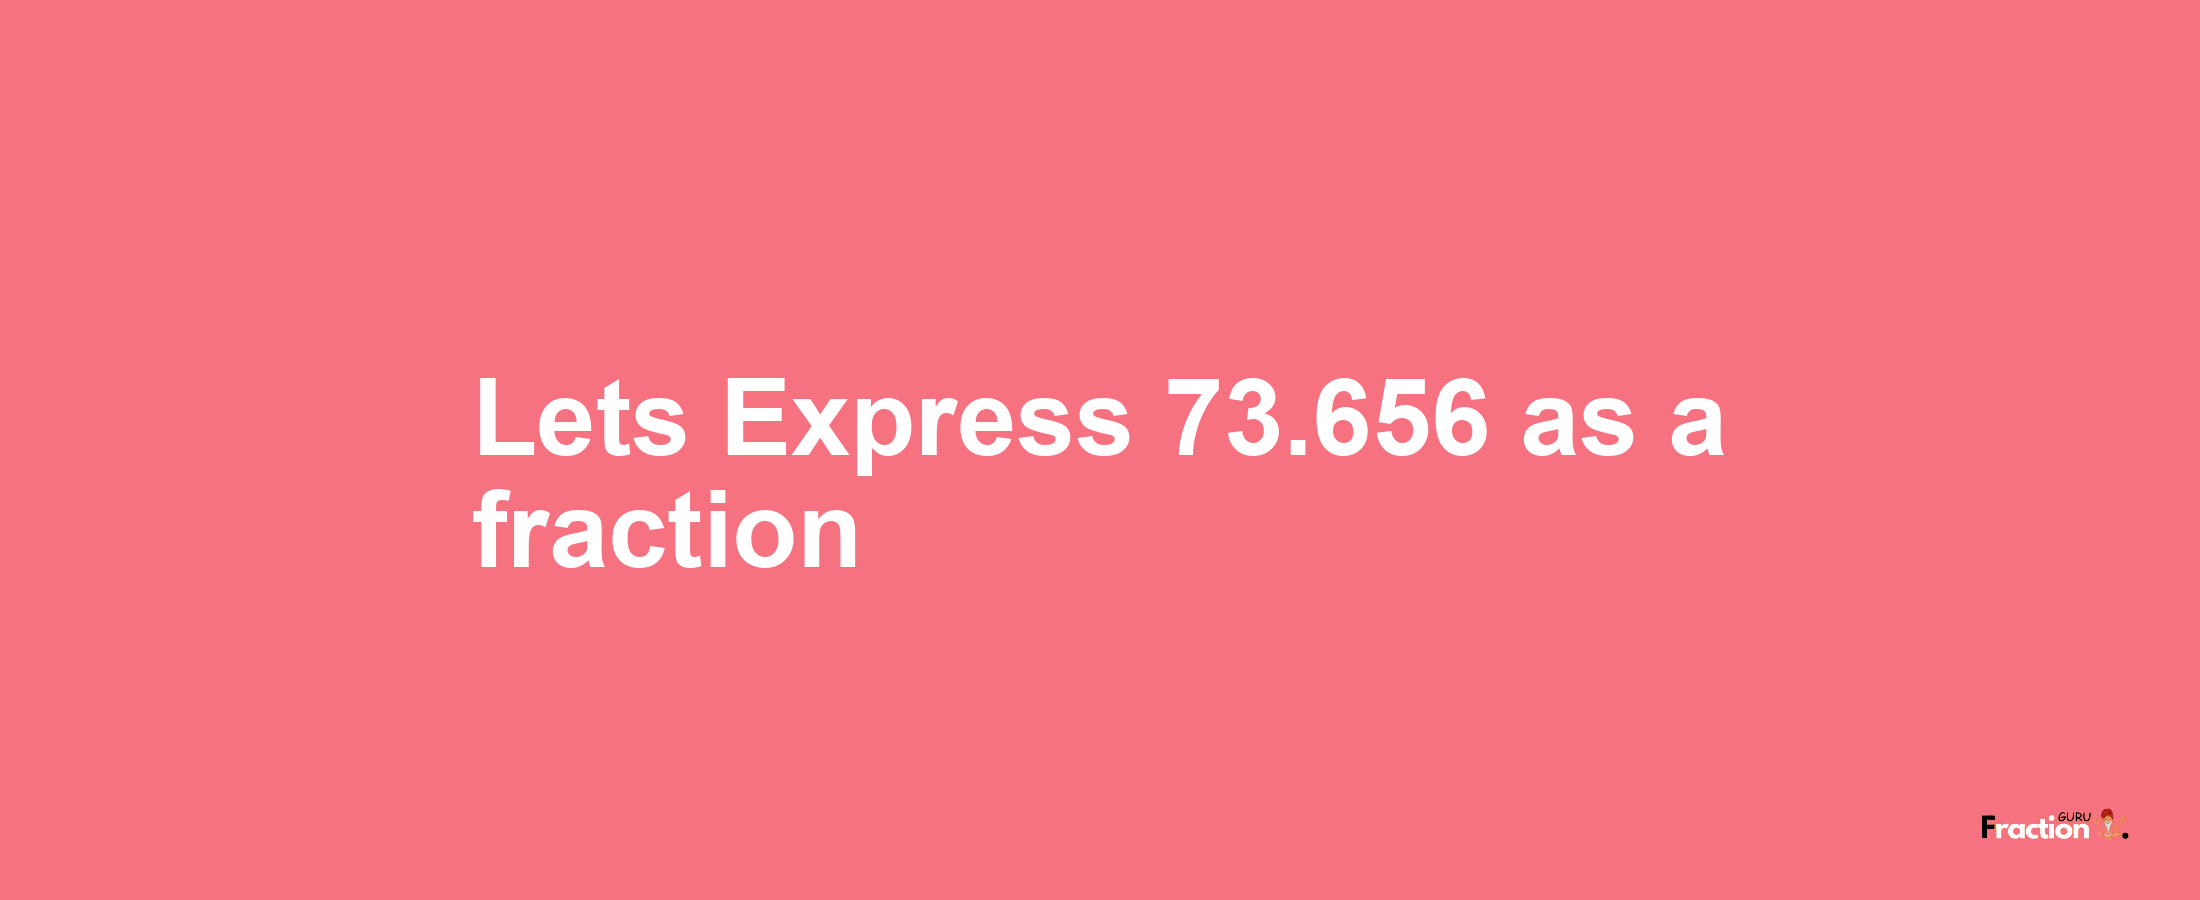 Lets Express 73.656 as afraction